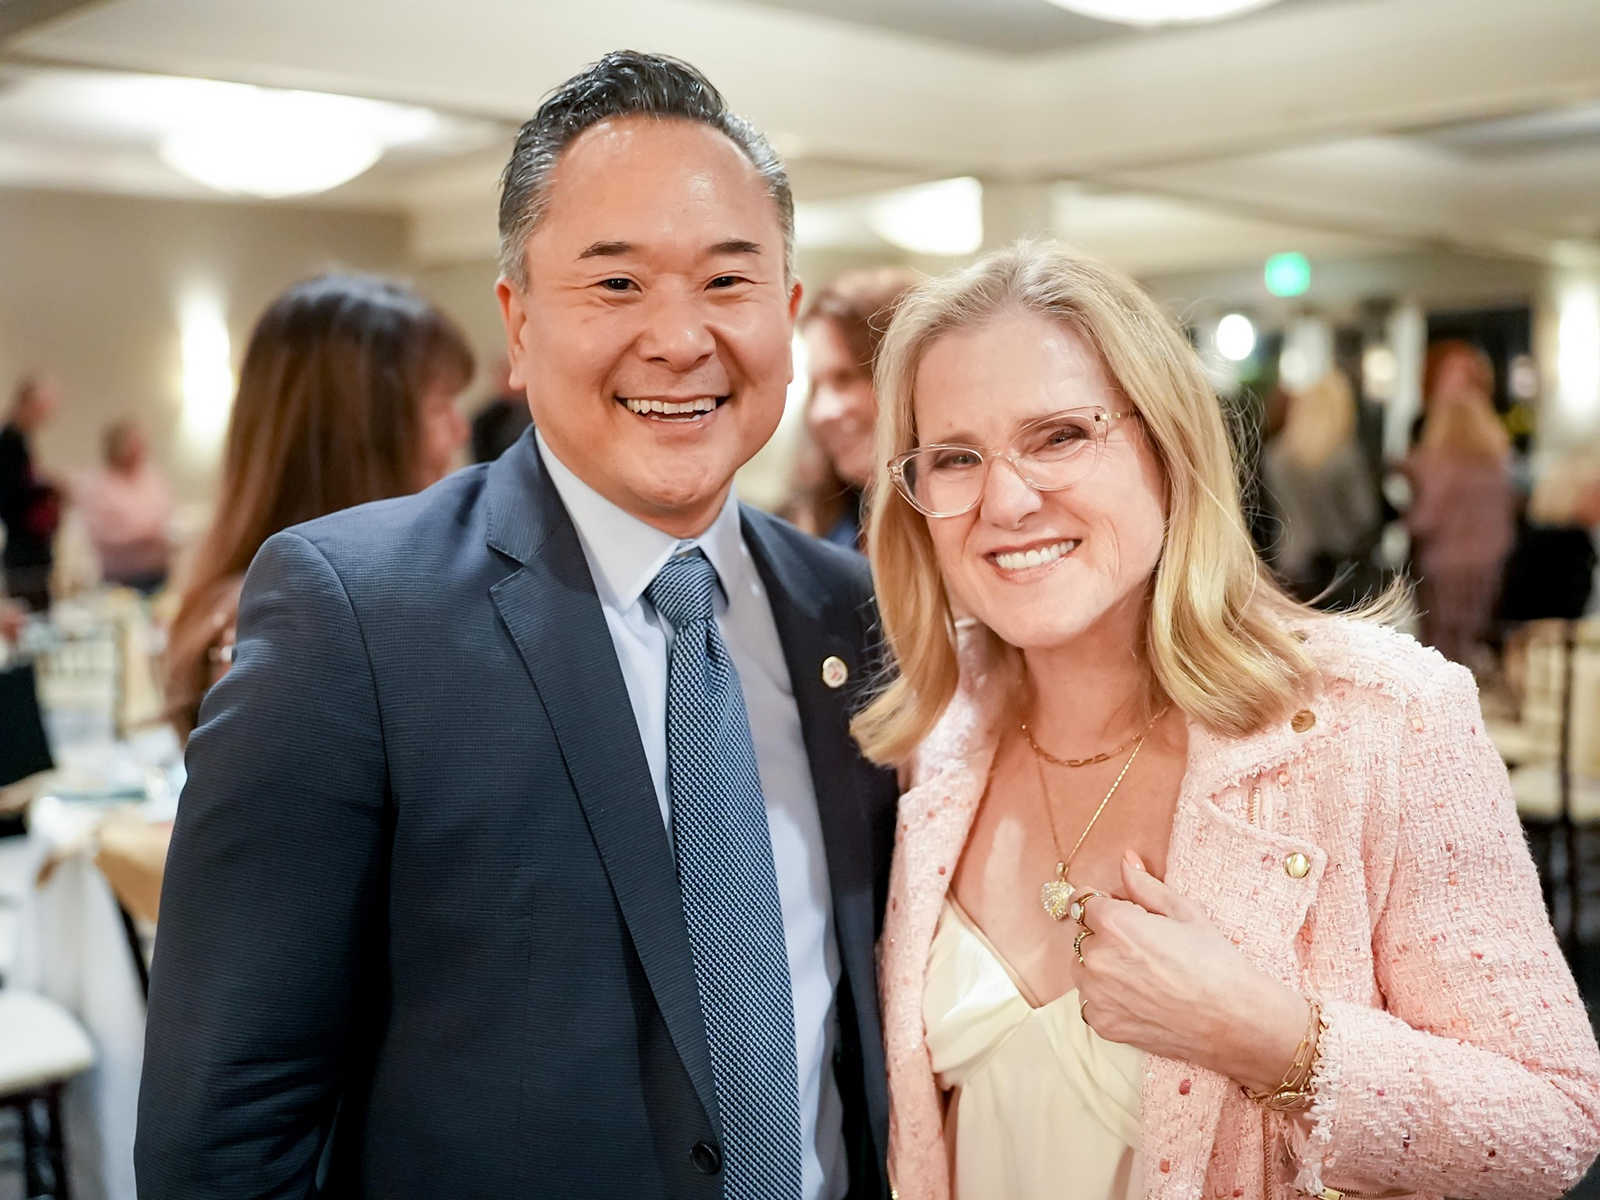 Nancy Cartwright was the keynote speaker at the North Valley Regional Chamber of Commerce Installation Dinner.